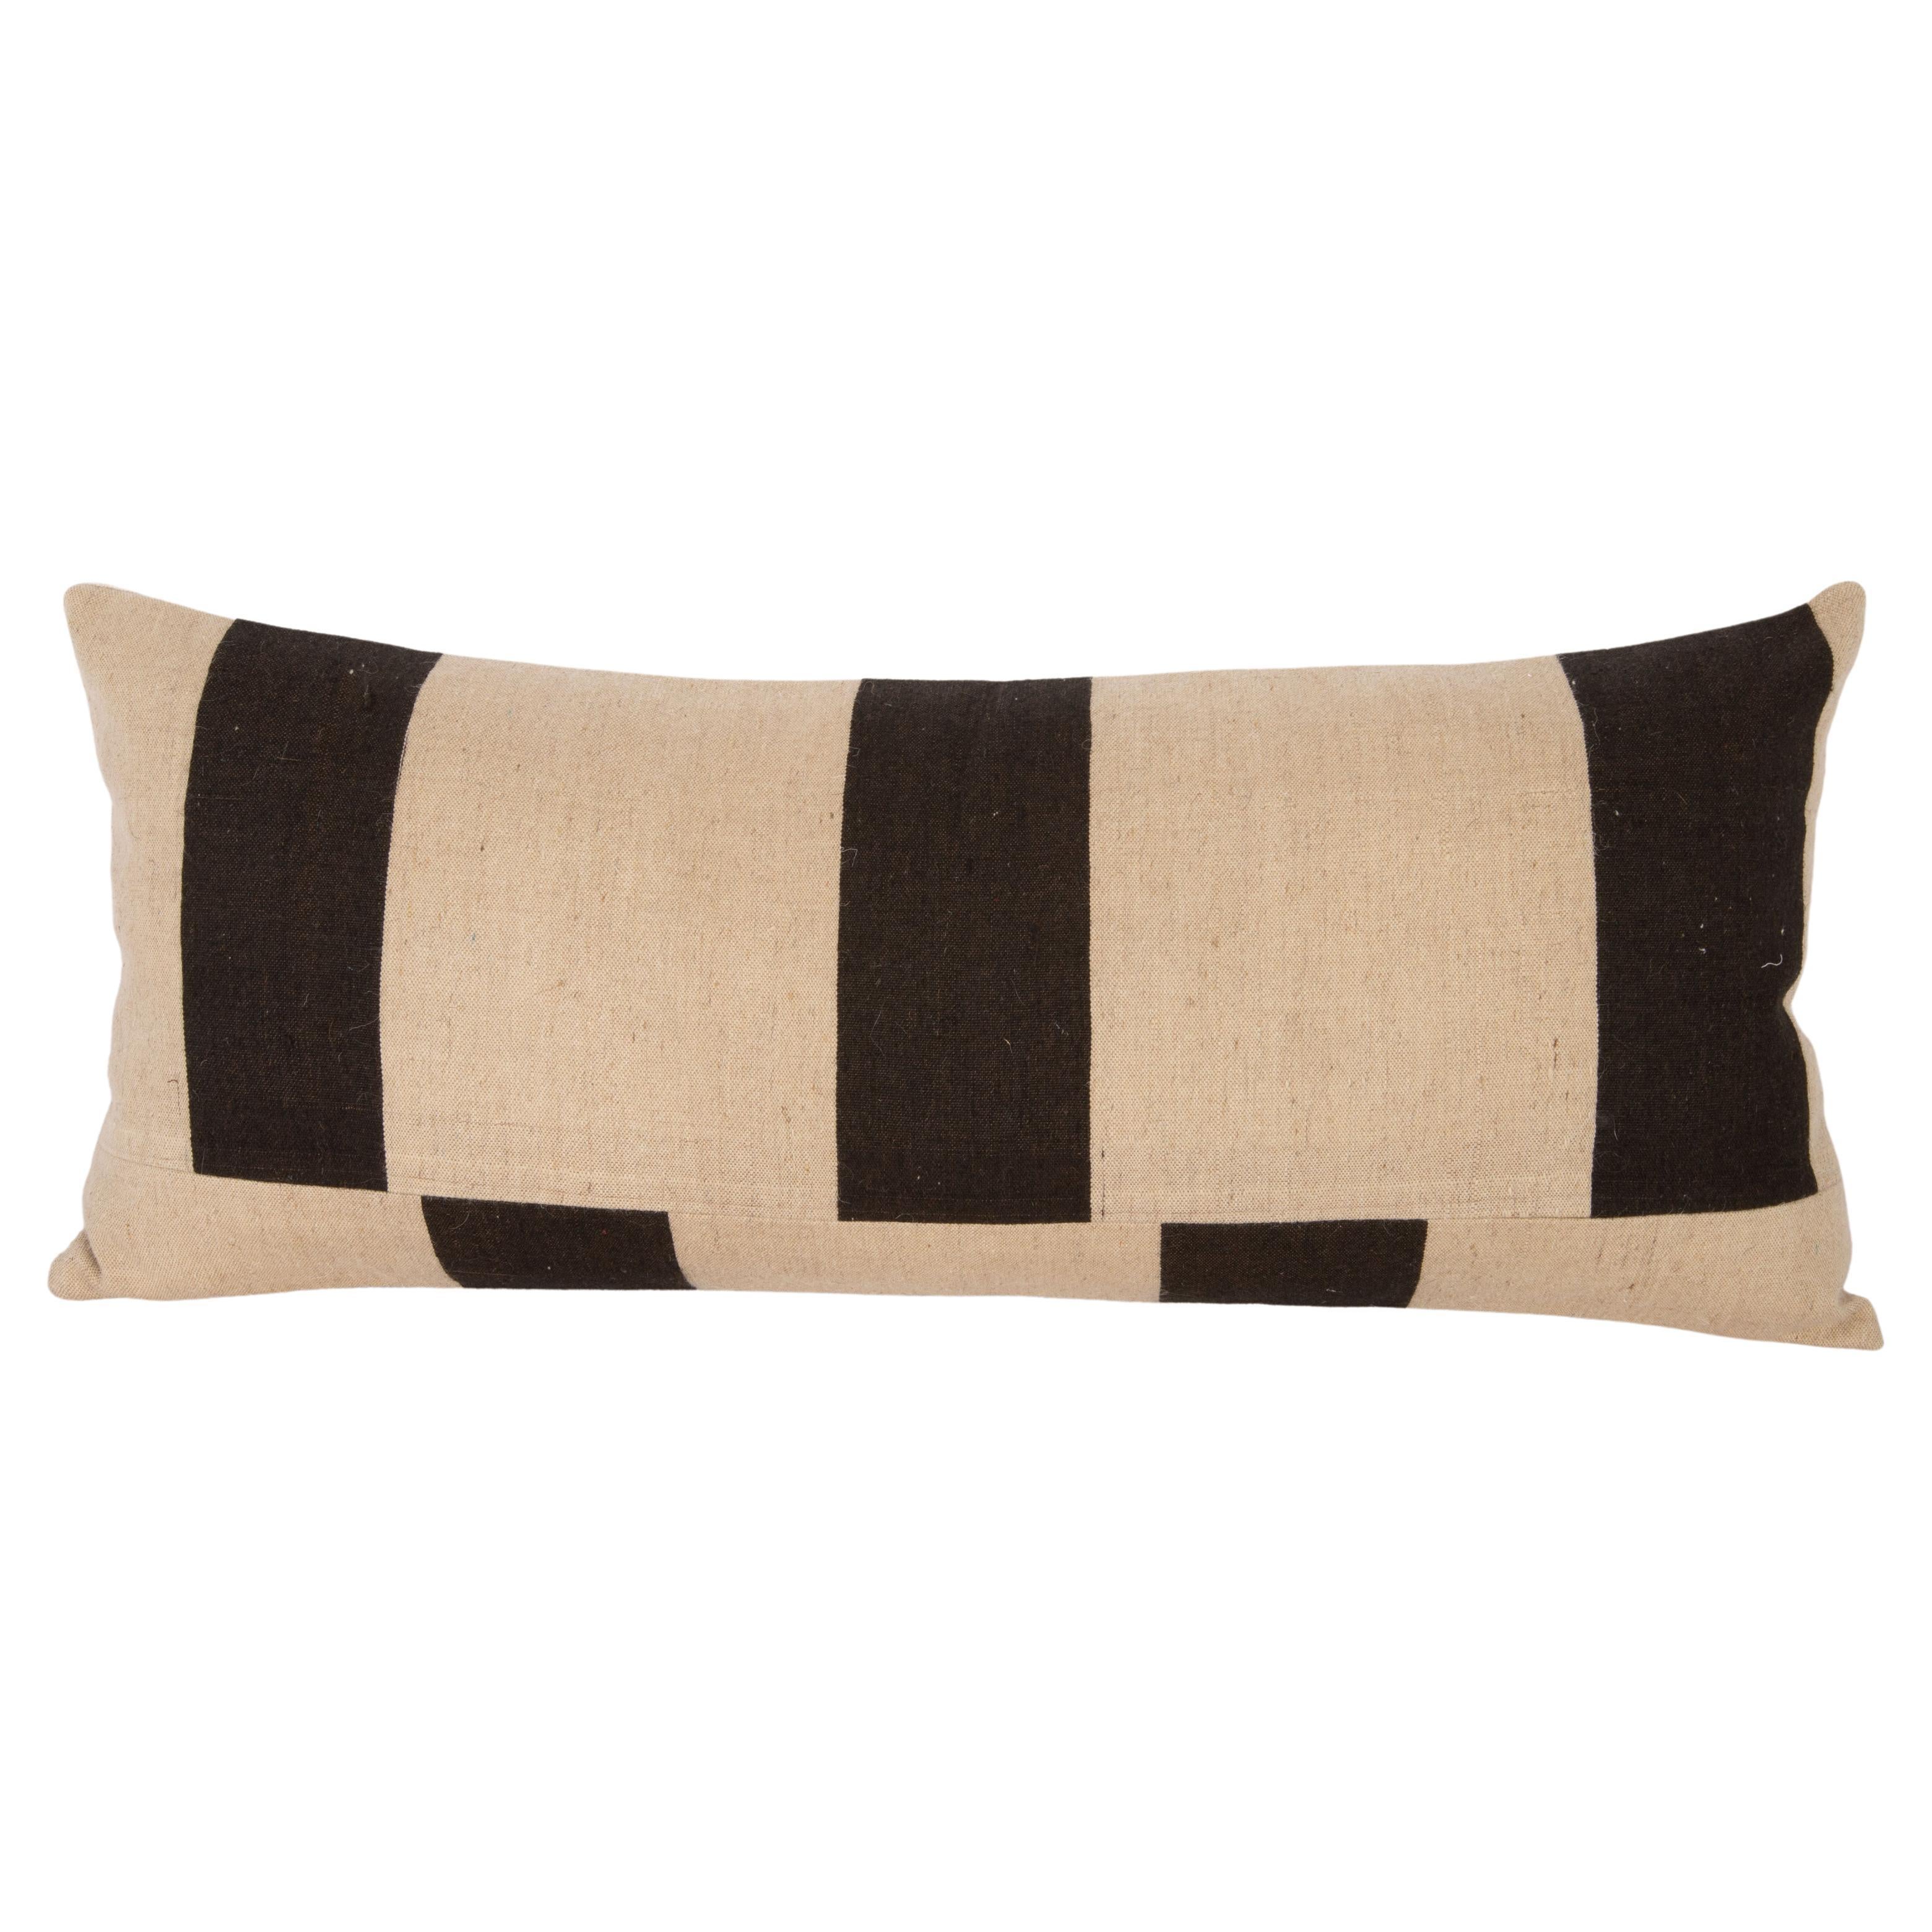 Black and White Lumbar Pillow Cover Made from a Contemporary Textile